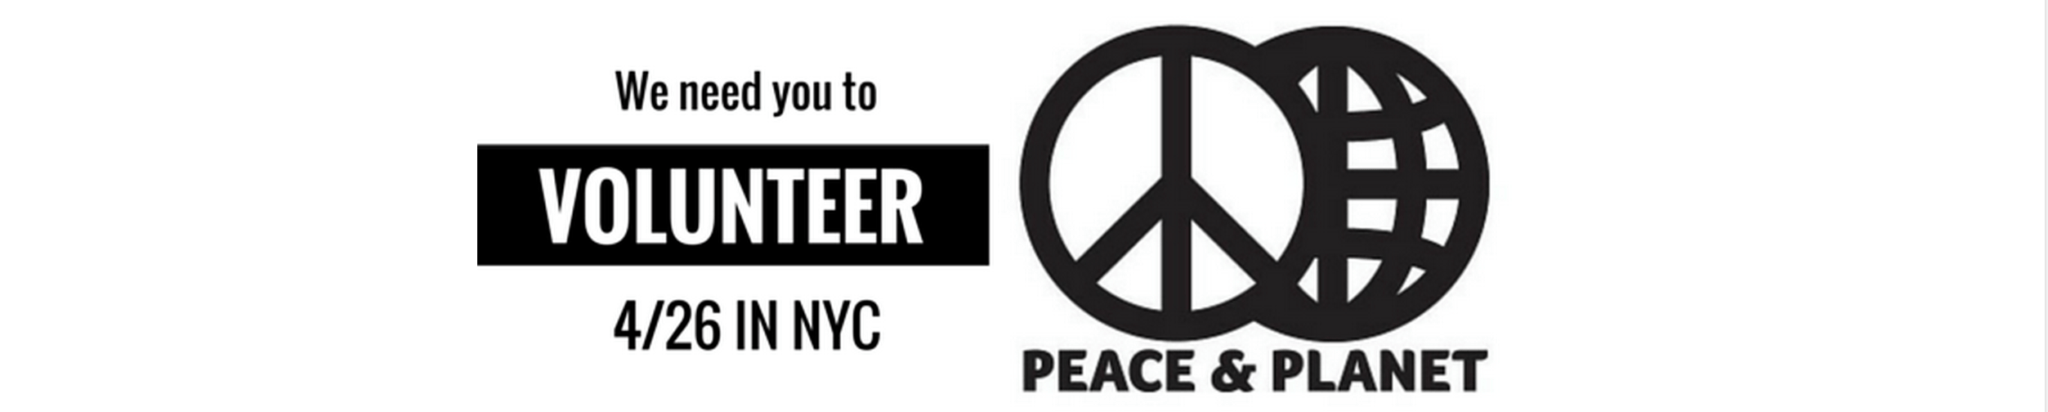 Sign up to Volunteer for Peace & Planet